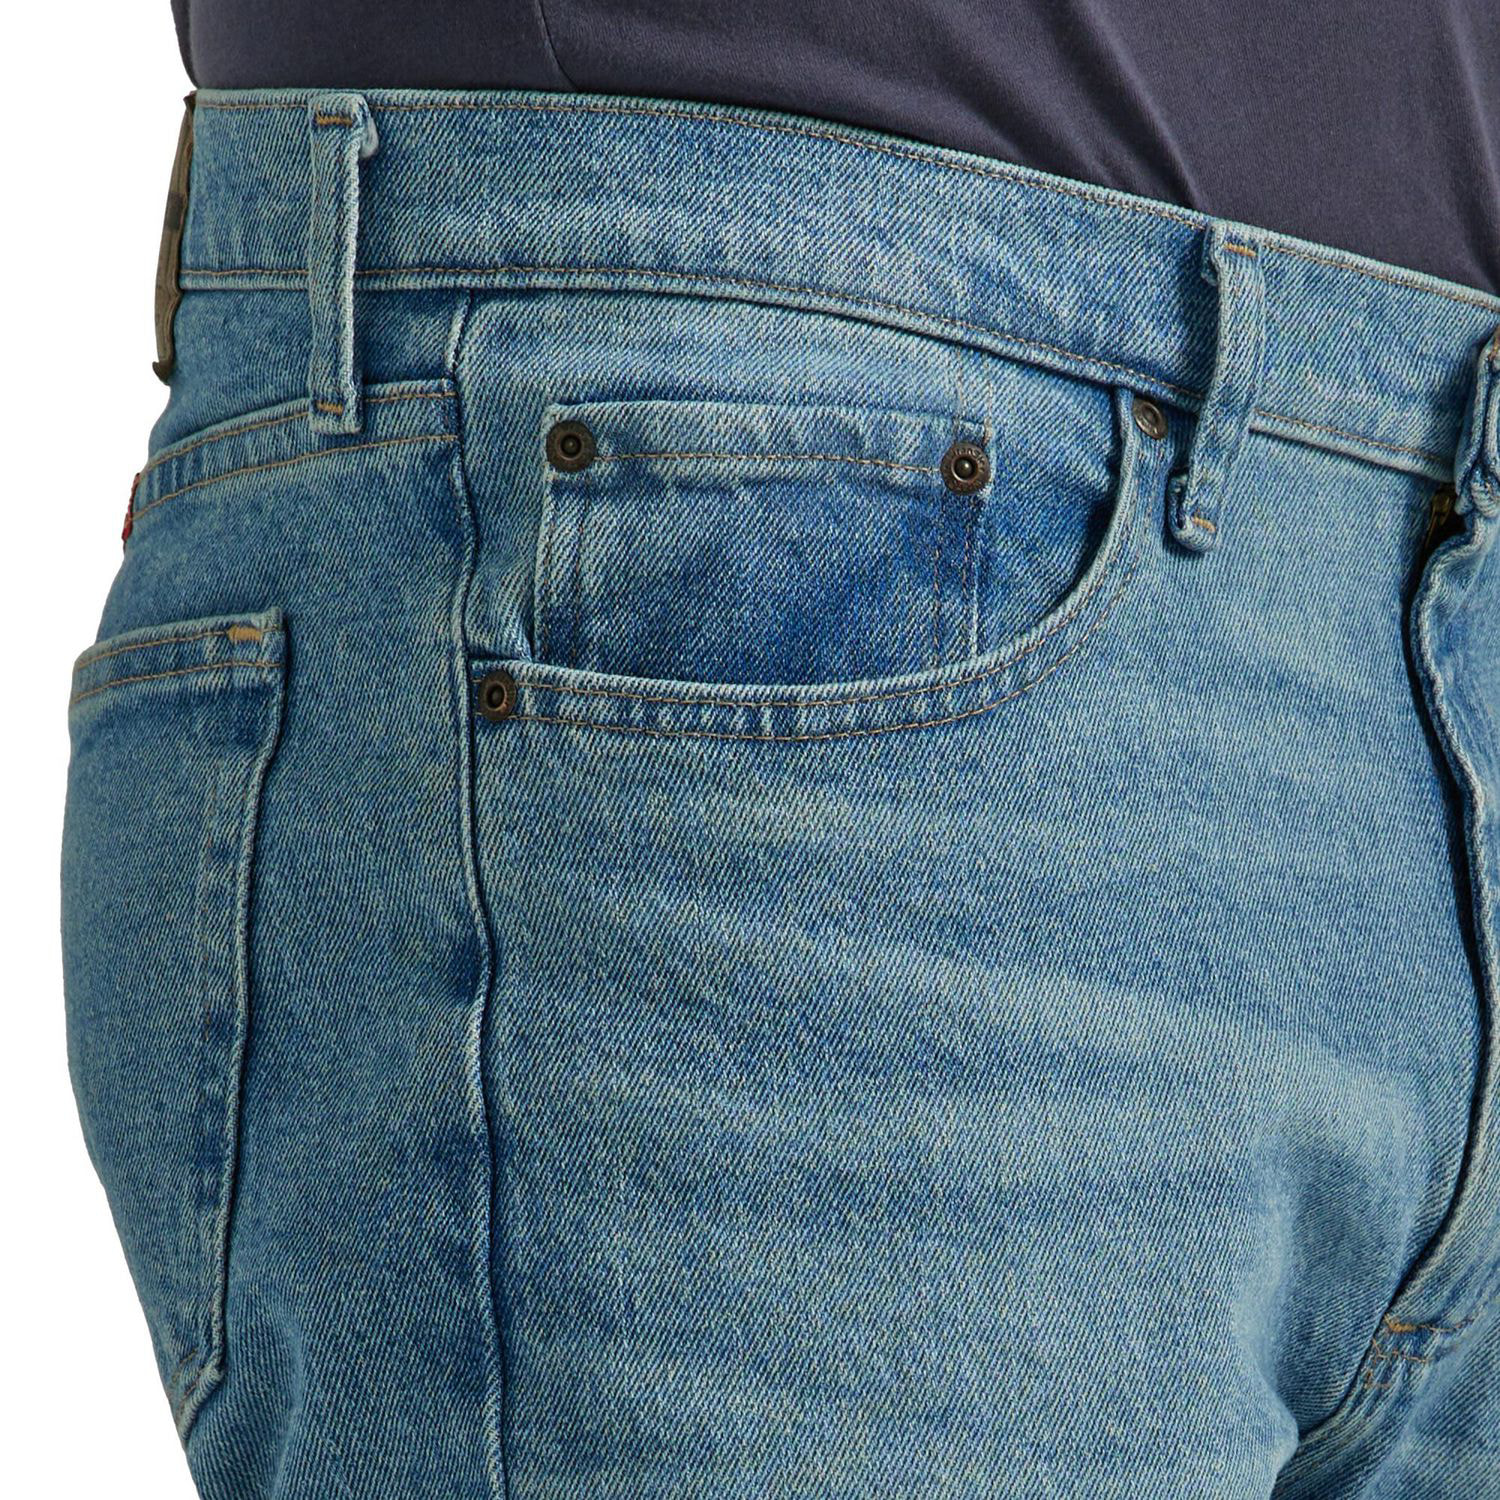 New Wrangler Five Star Relaxed Fit Jeans All Men`s Sizes Four